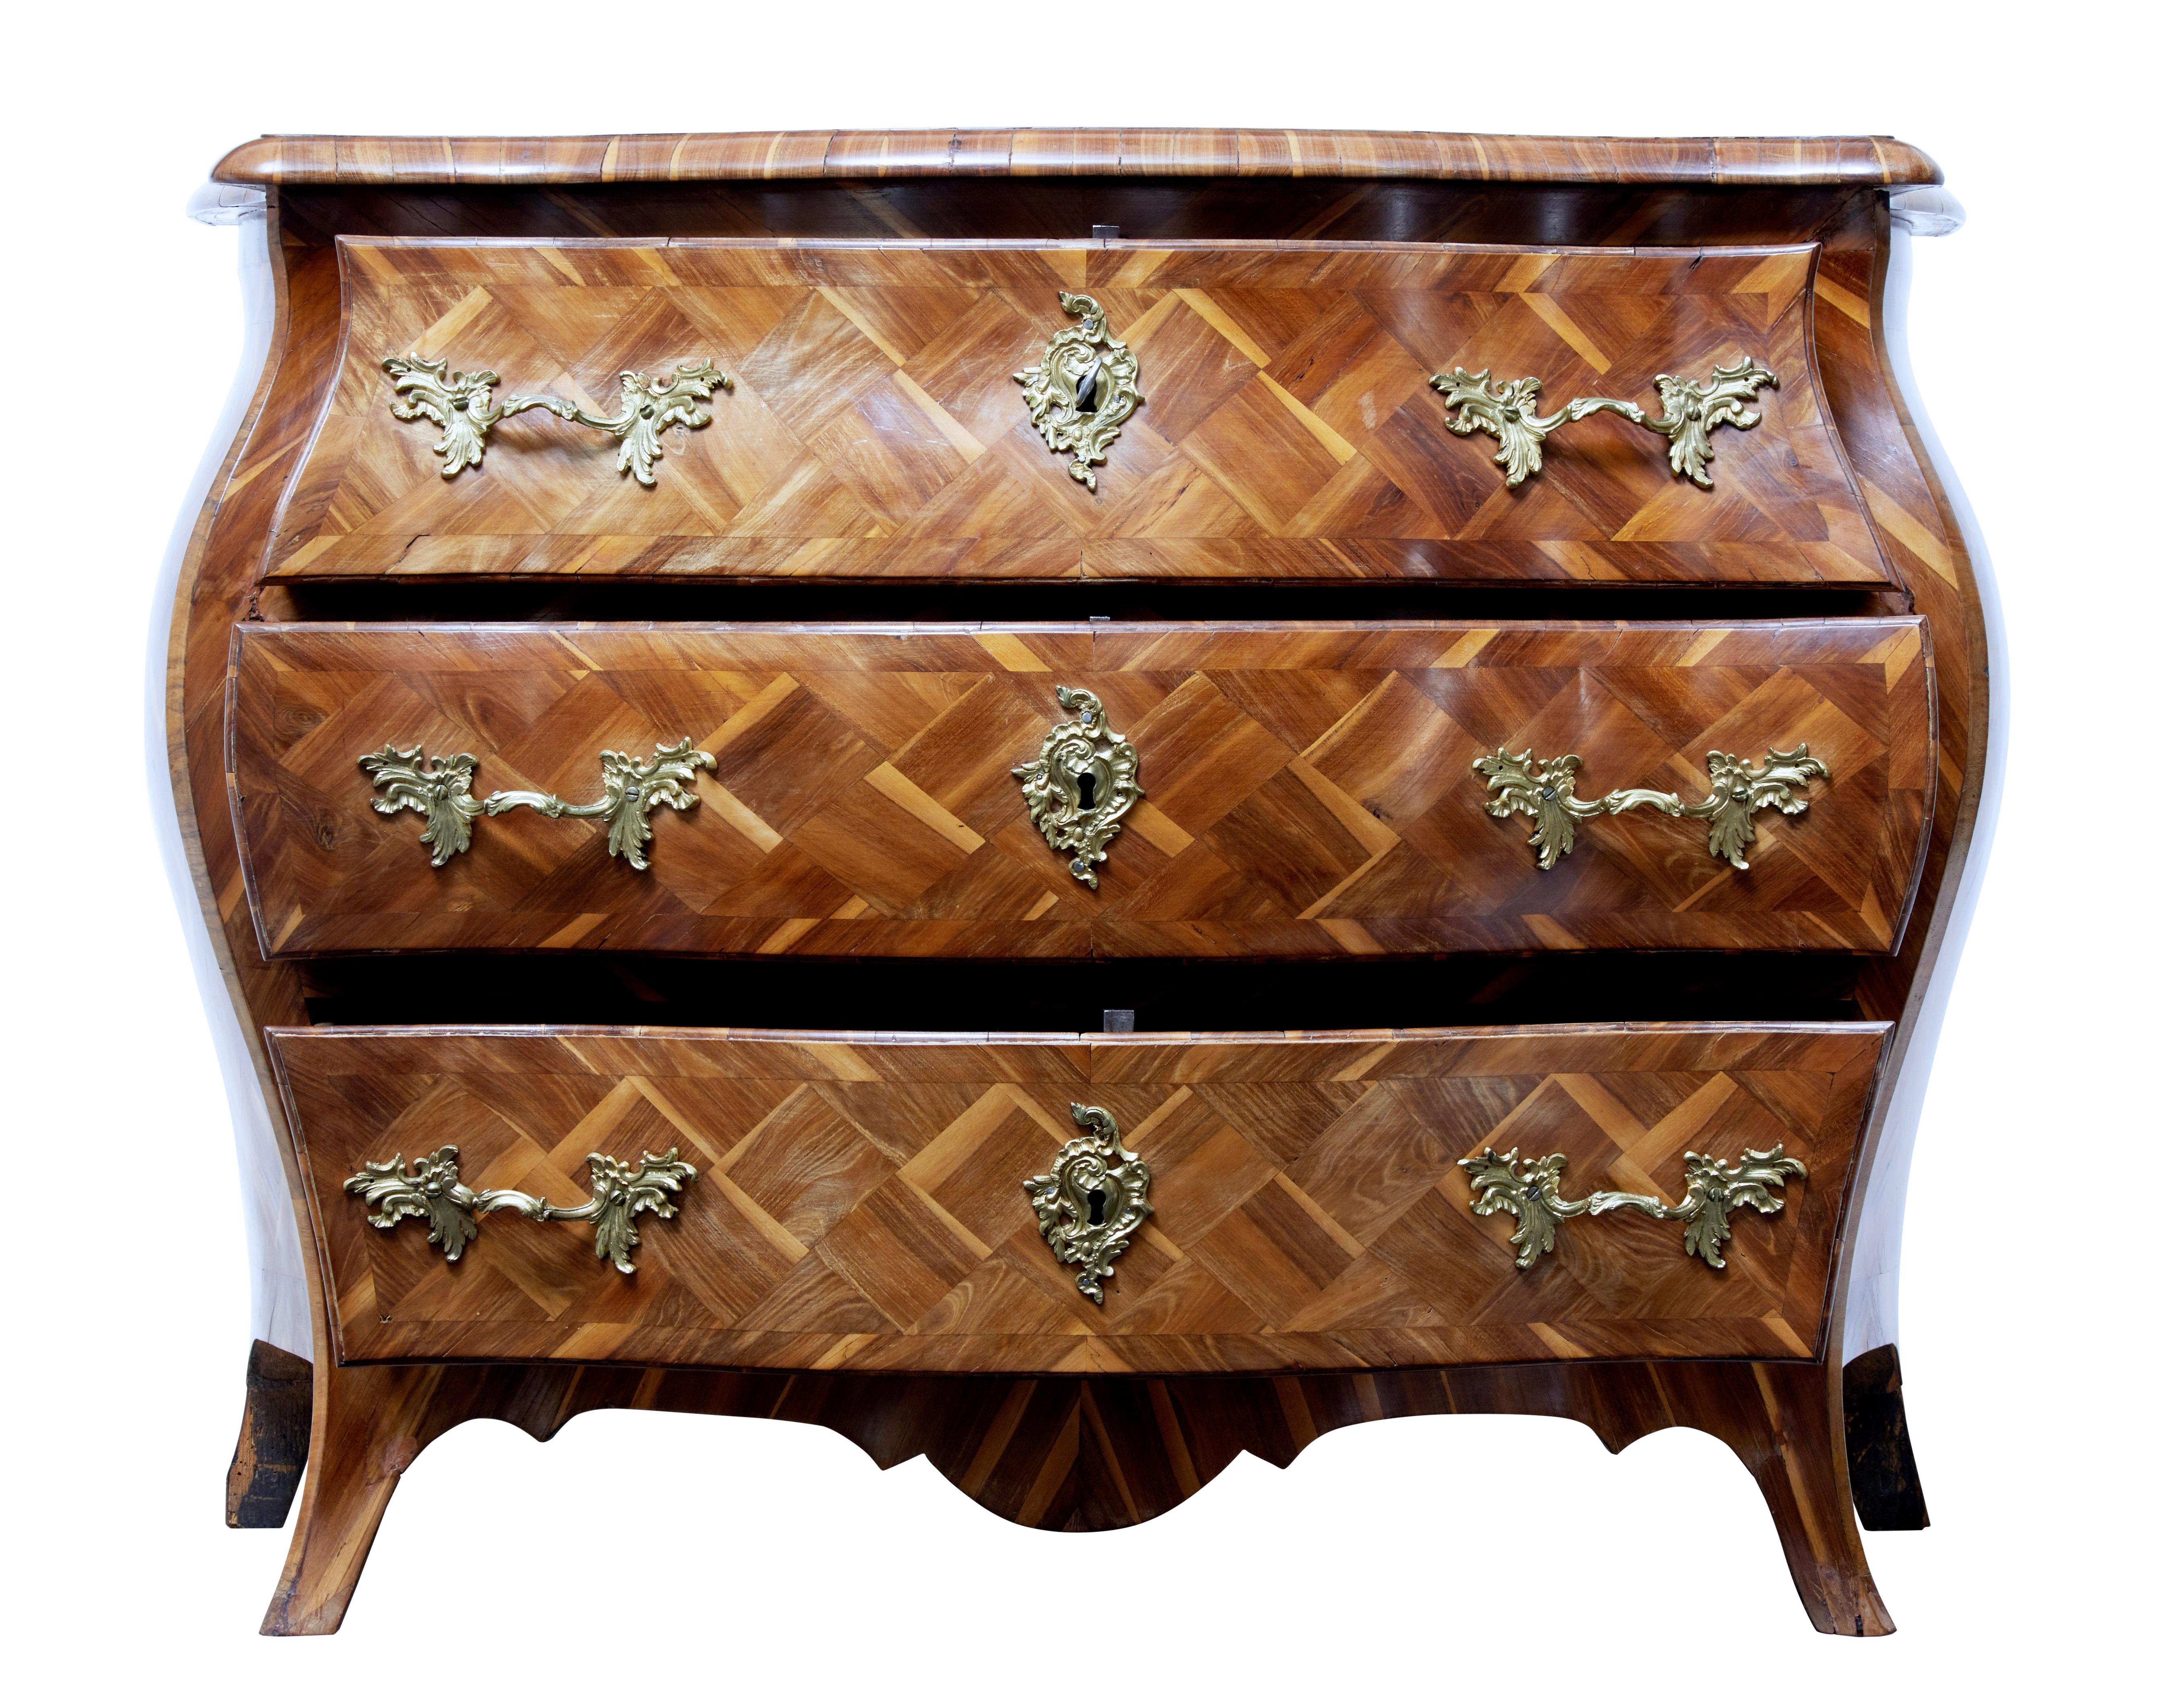 We are pleased to offer one of the finest commodes we have dealt in. Rococo period and made in plum wood, circa 1730.

Parquet has been finely arranged in angled squares and cross banded in the same plum wood.

Elegant bombe shape, three drawers